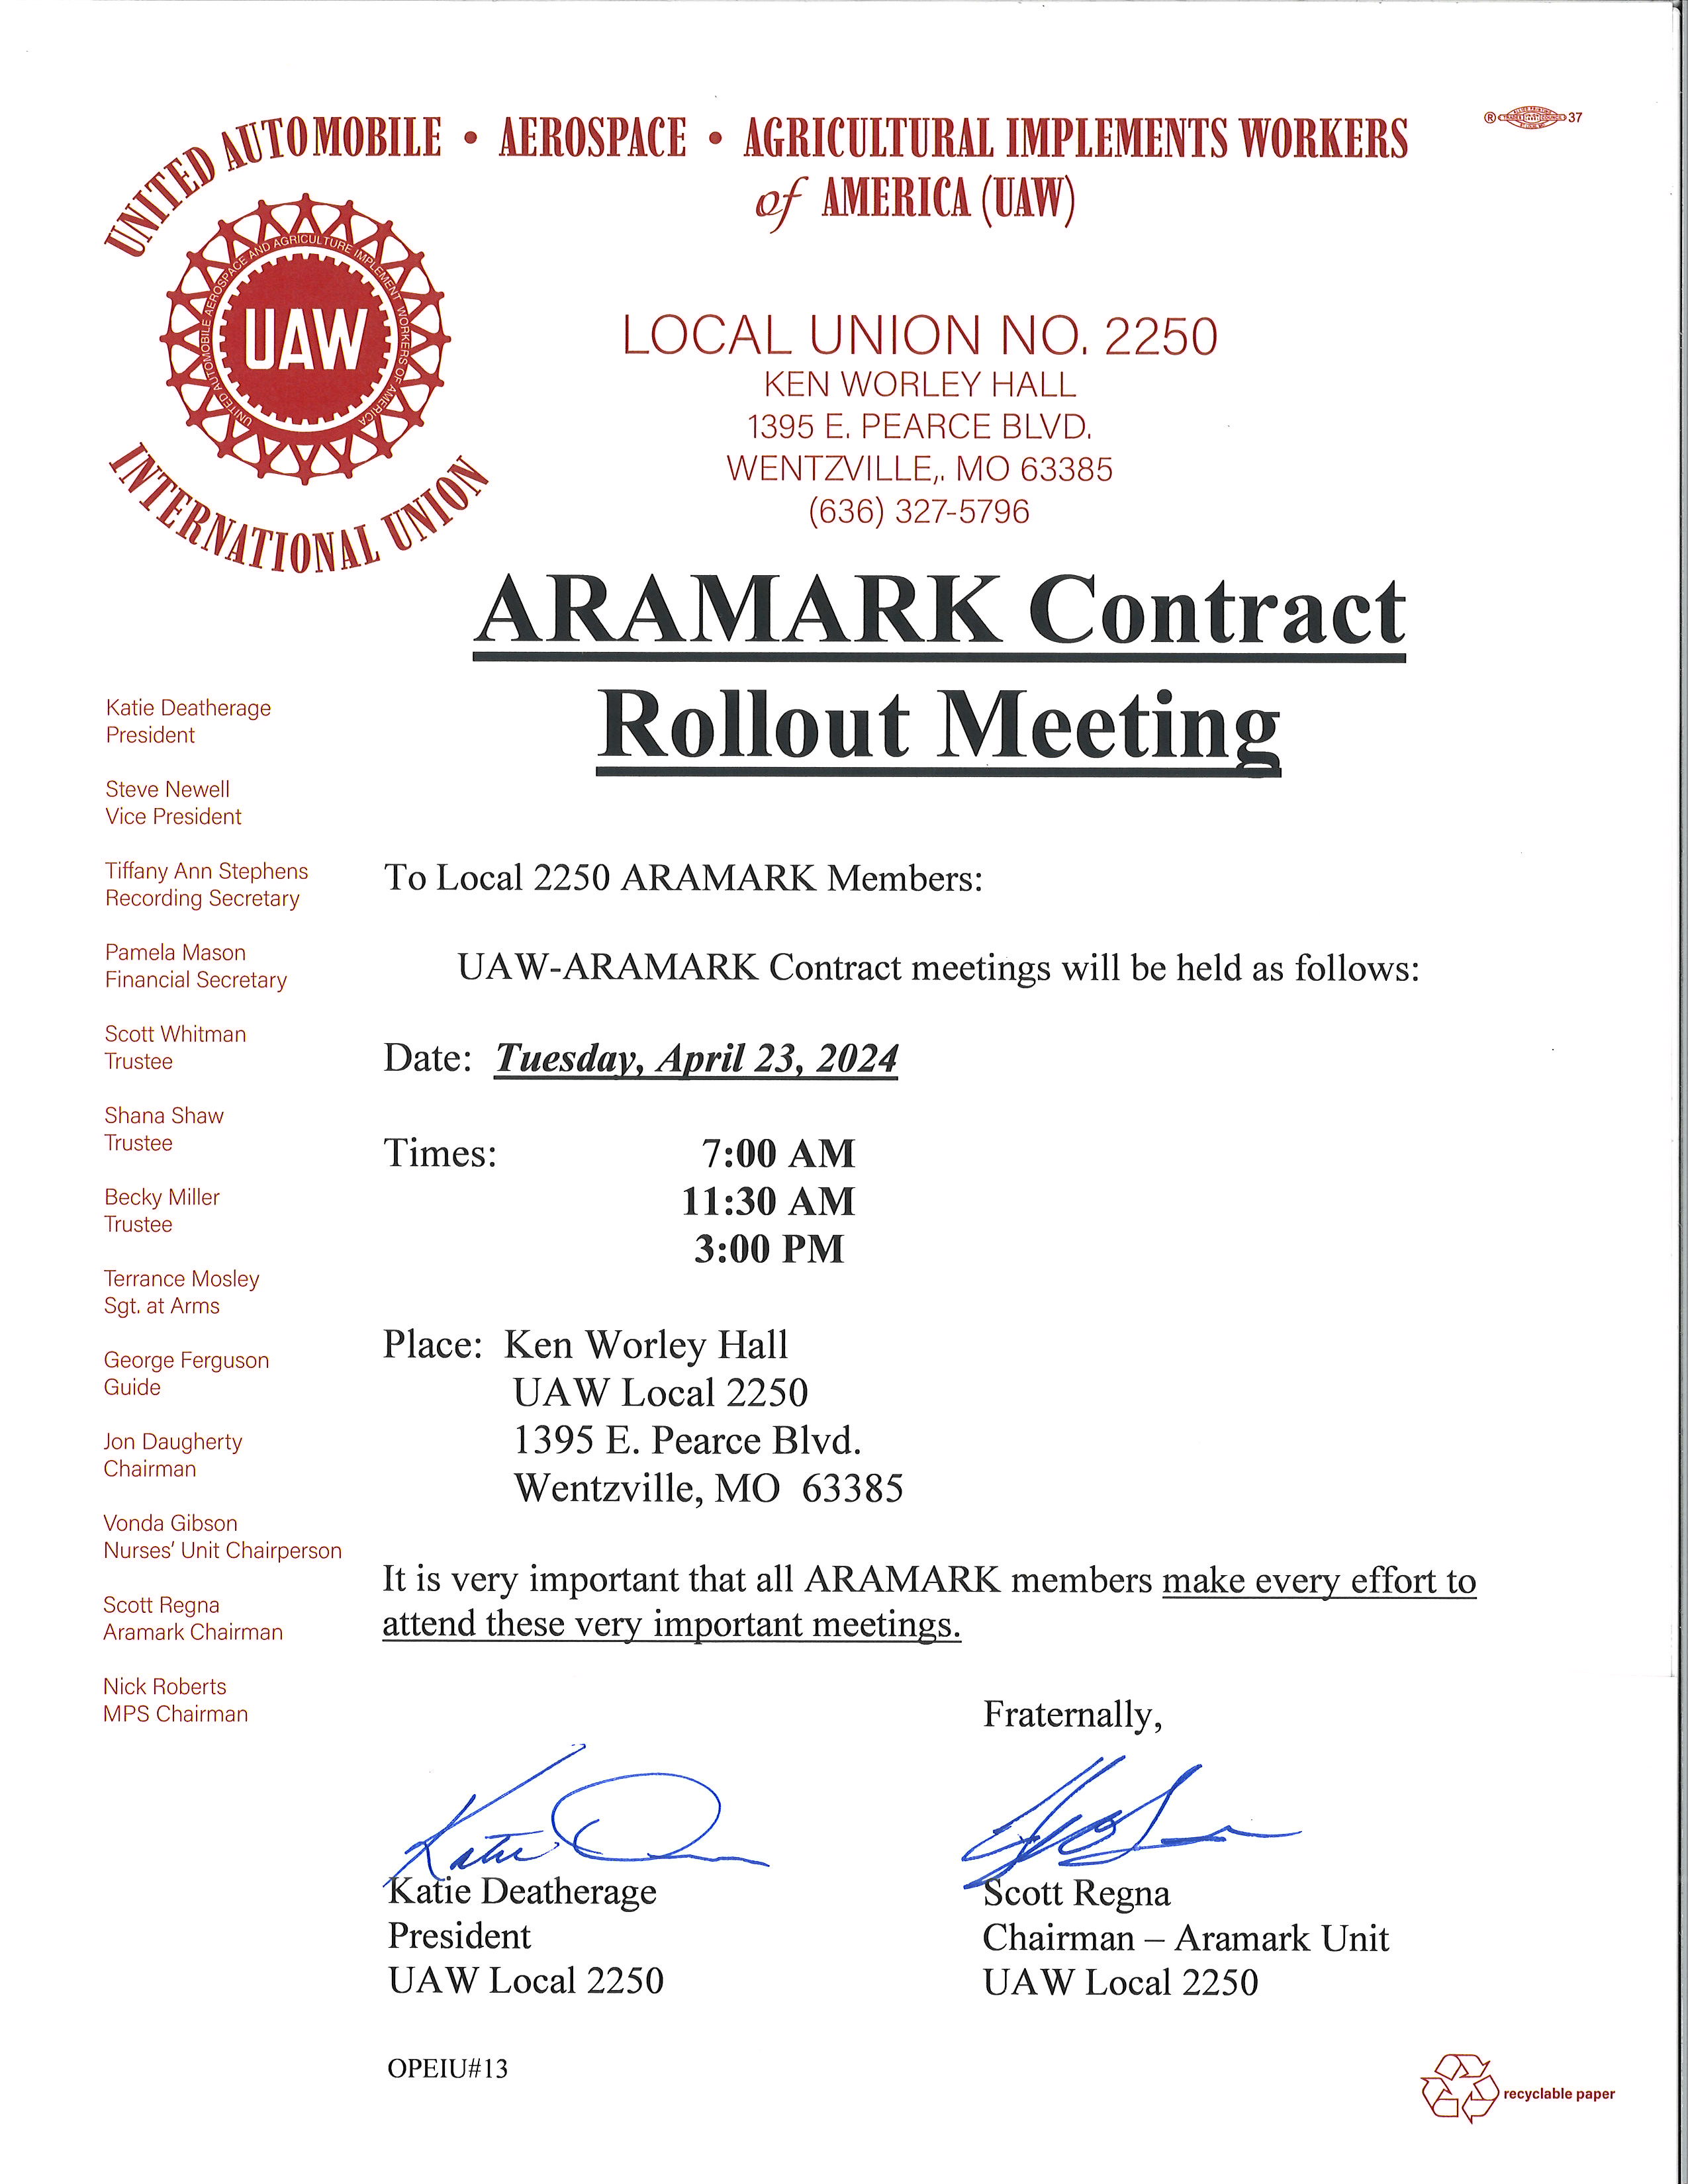 Let’s Find Out What Is In The Aramark Contract!